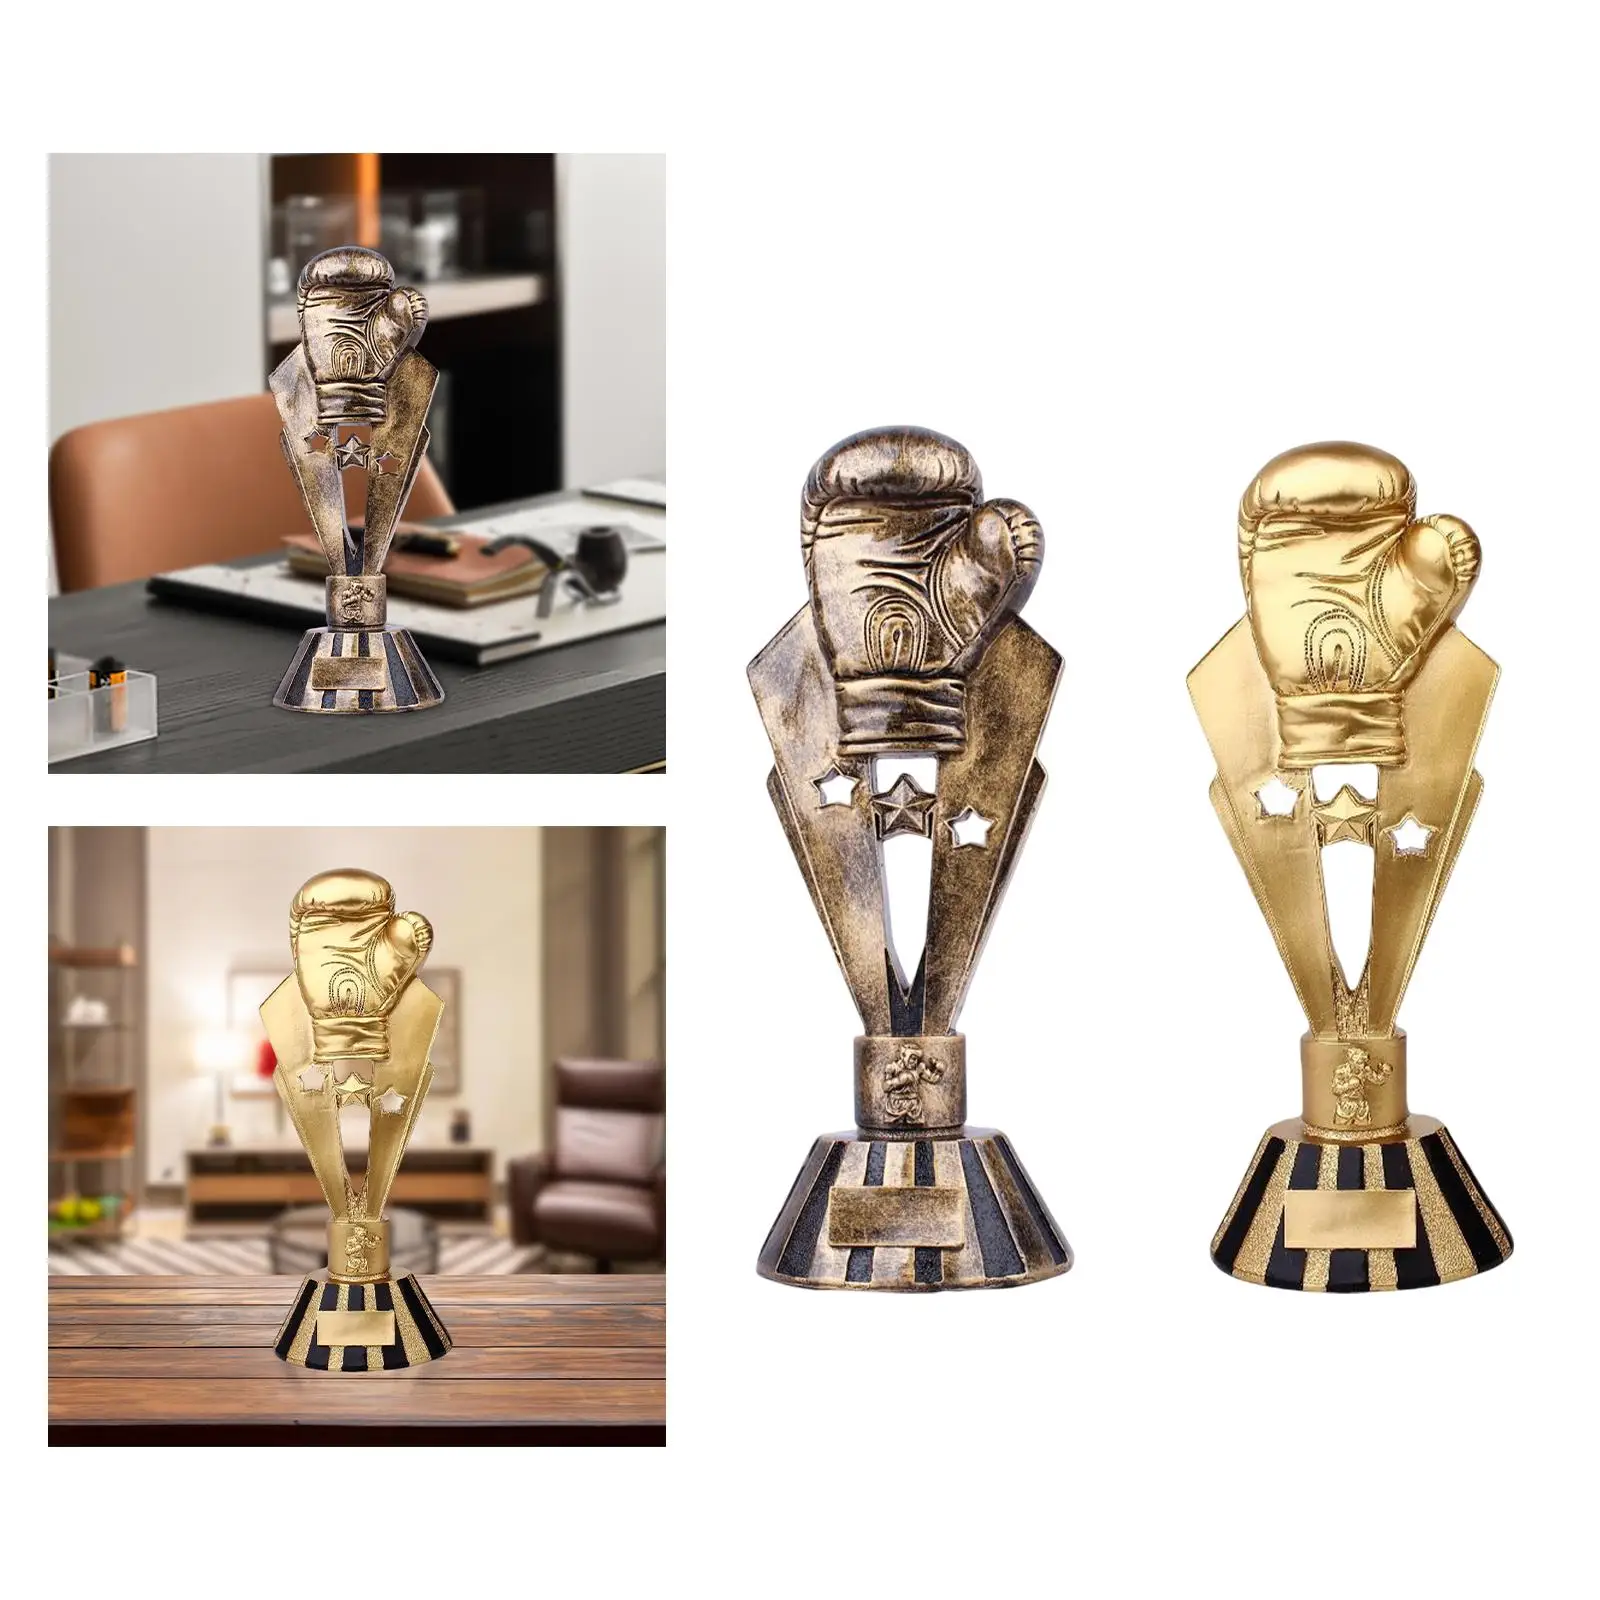 Boxing Trophies Resin Statue Figurine Boxing Award Ornaments for Competition